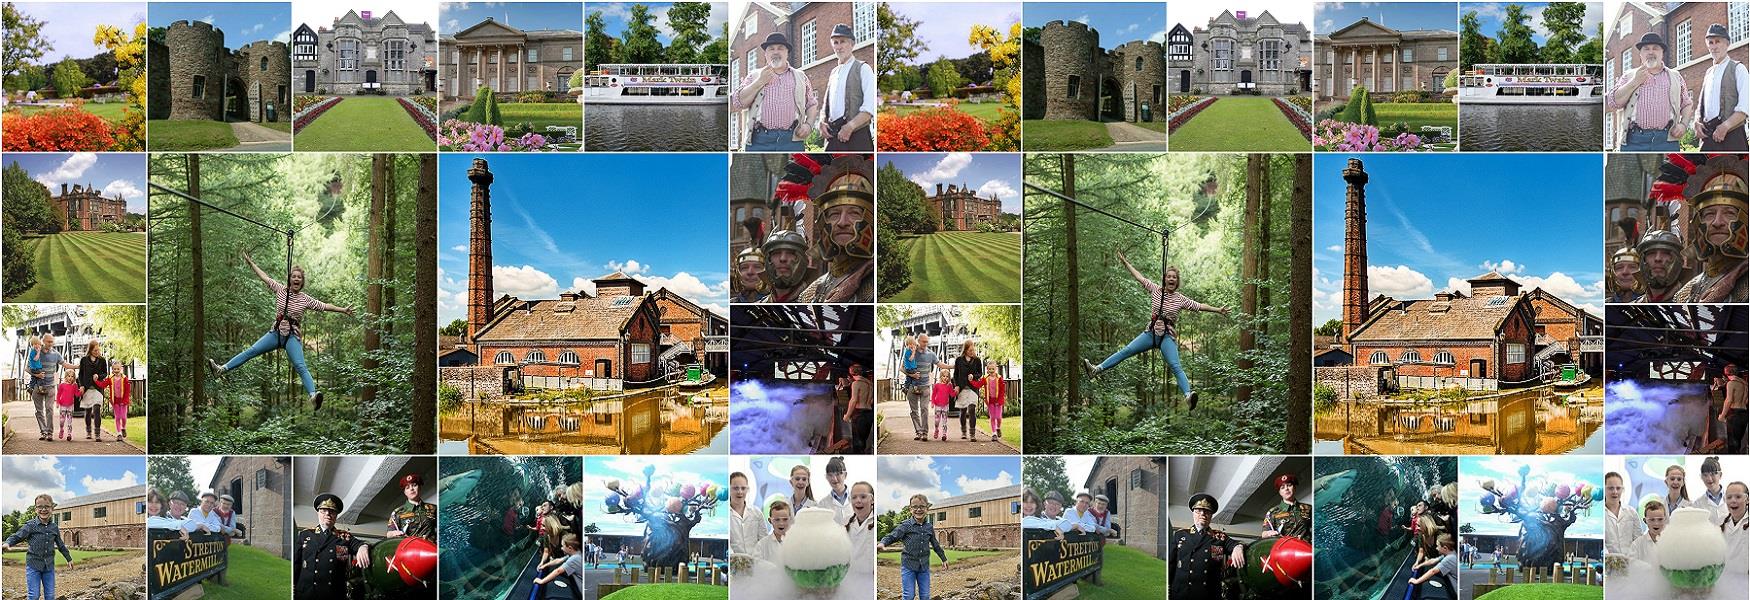 Download discount vouchers for Cheshire attractions